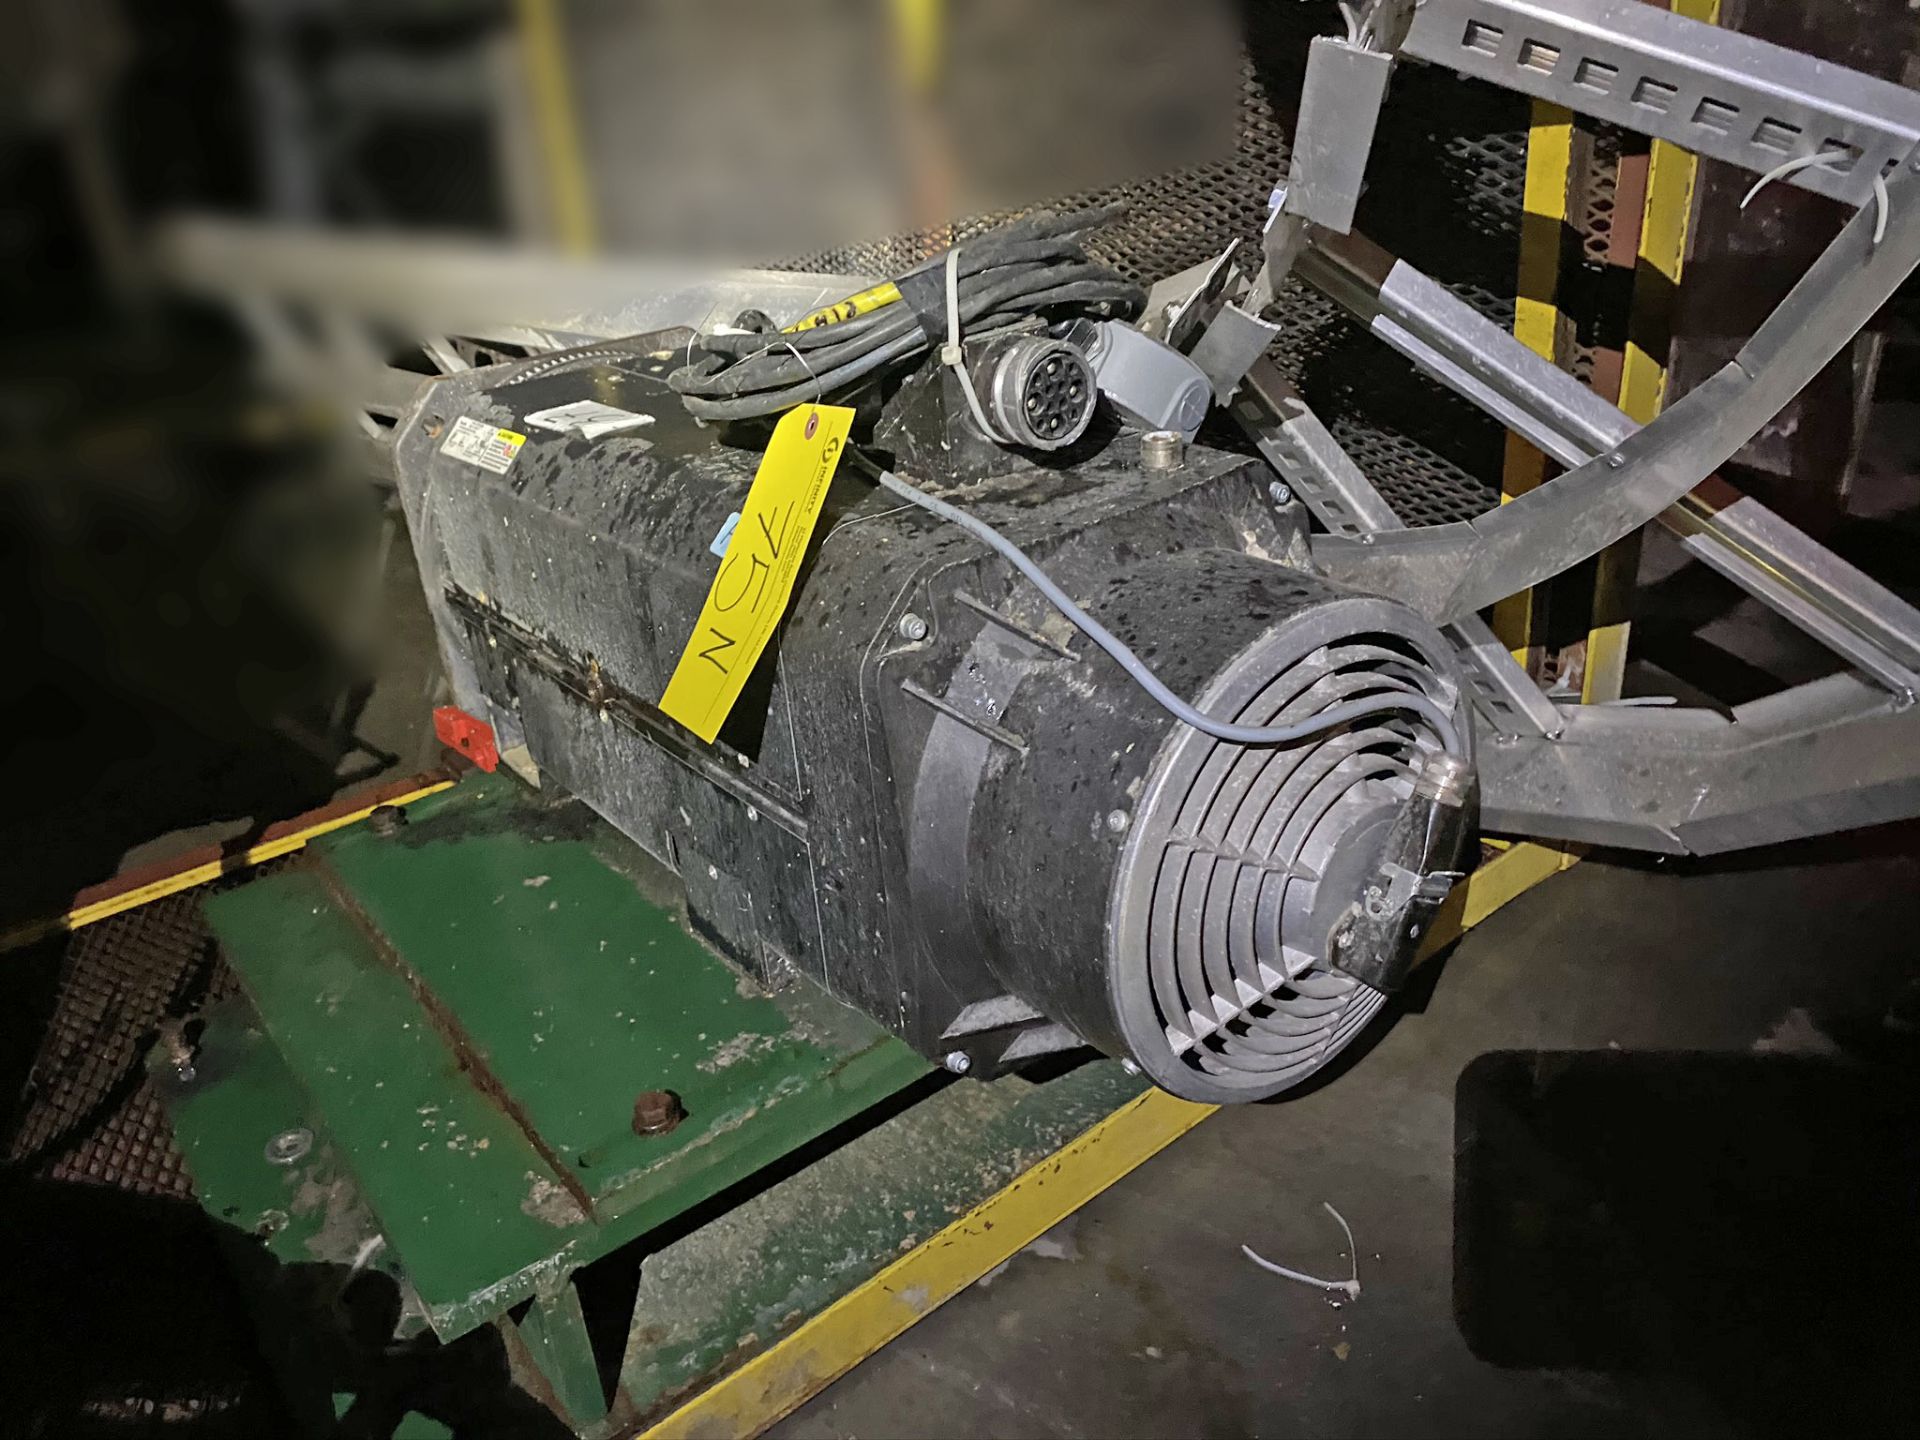 Rexroth 3-phase induction motor. Typ: MAD160C-020-S2-BK0-35-N1. S/N: 78002010000254. (S.F.) - Image 2 of 3